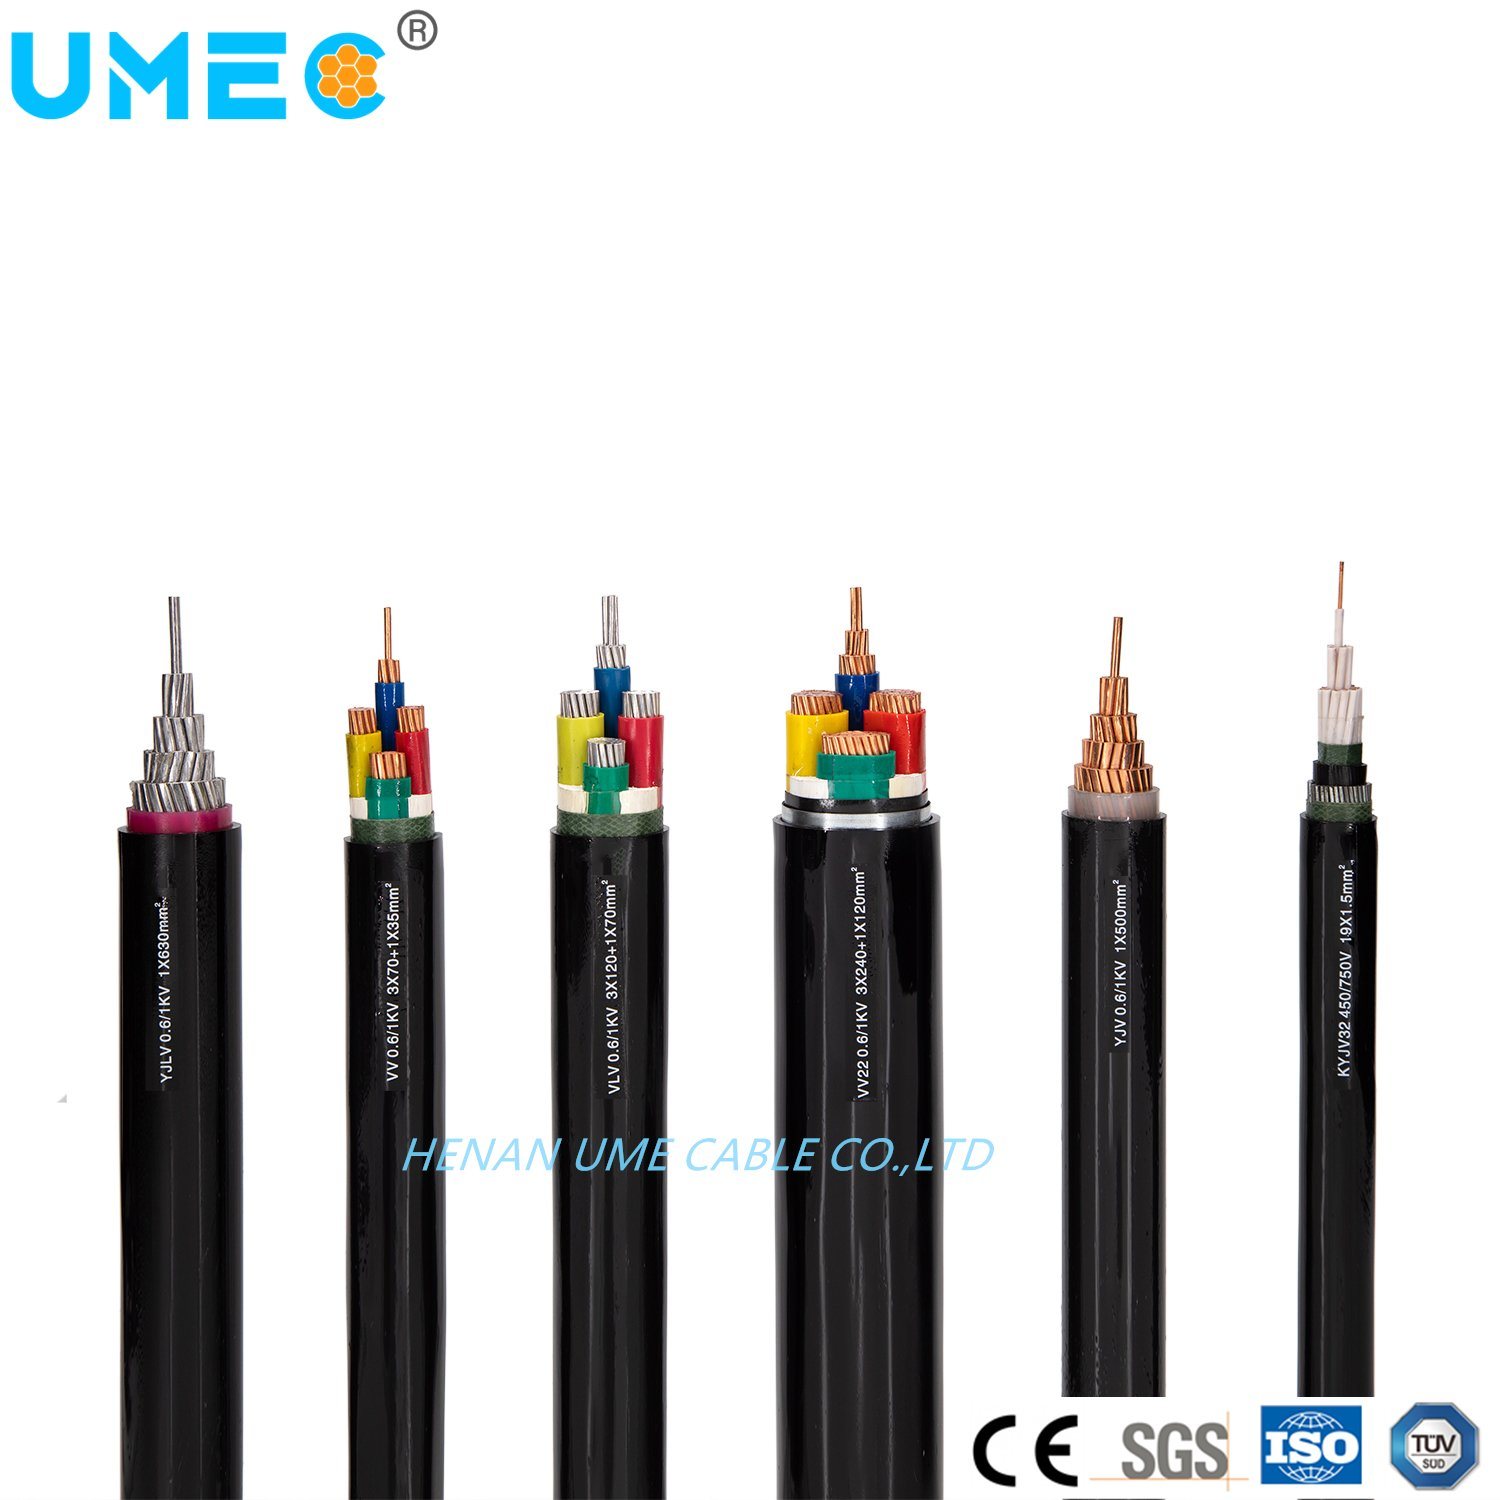 Medium Voltage 4+1-Core XLPE Insulated PVC Sheathed Power Cable